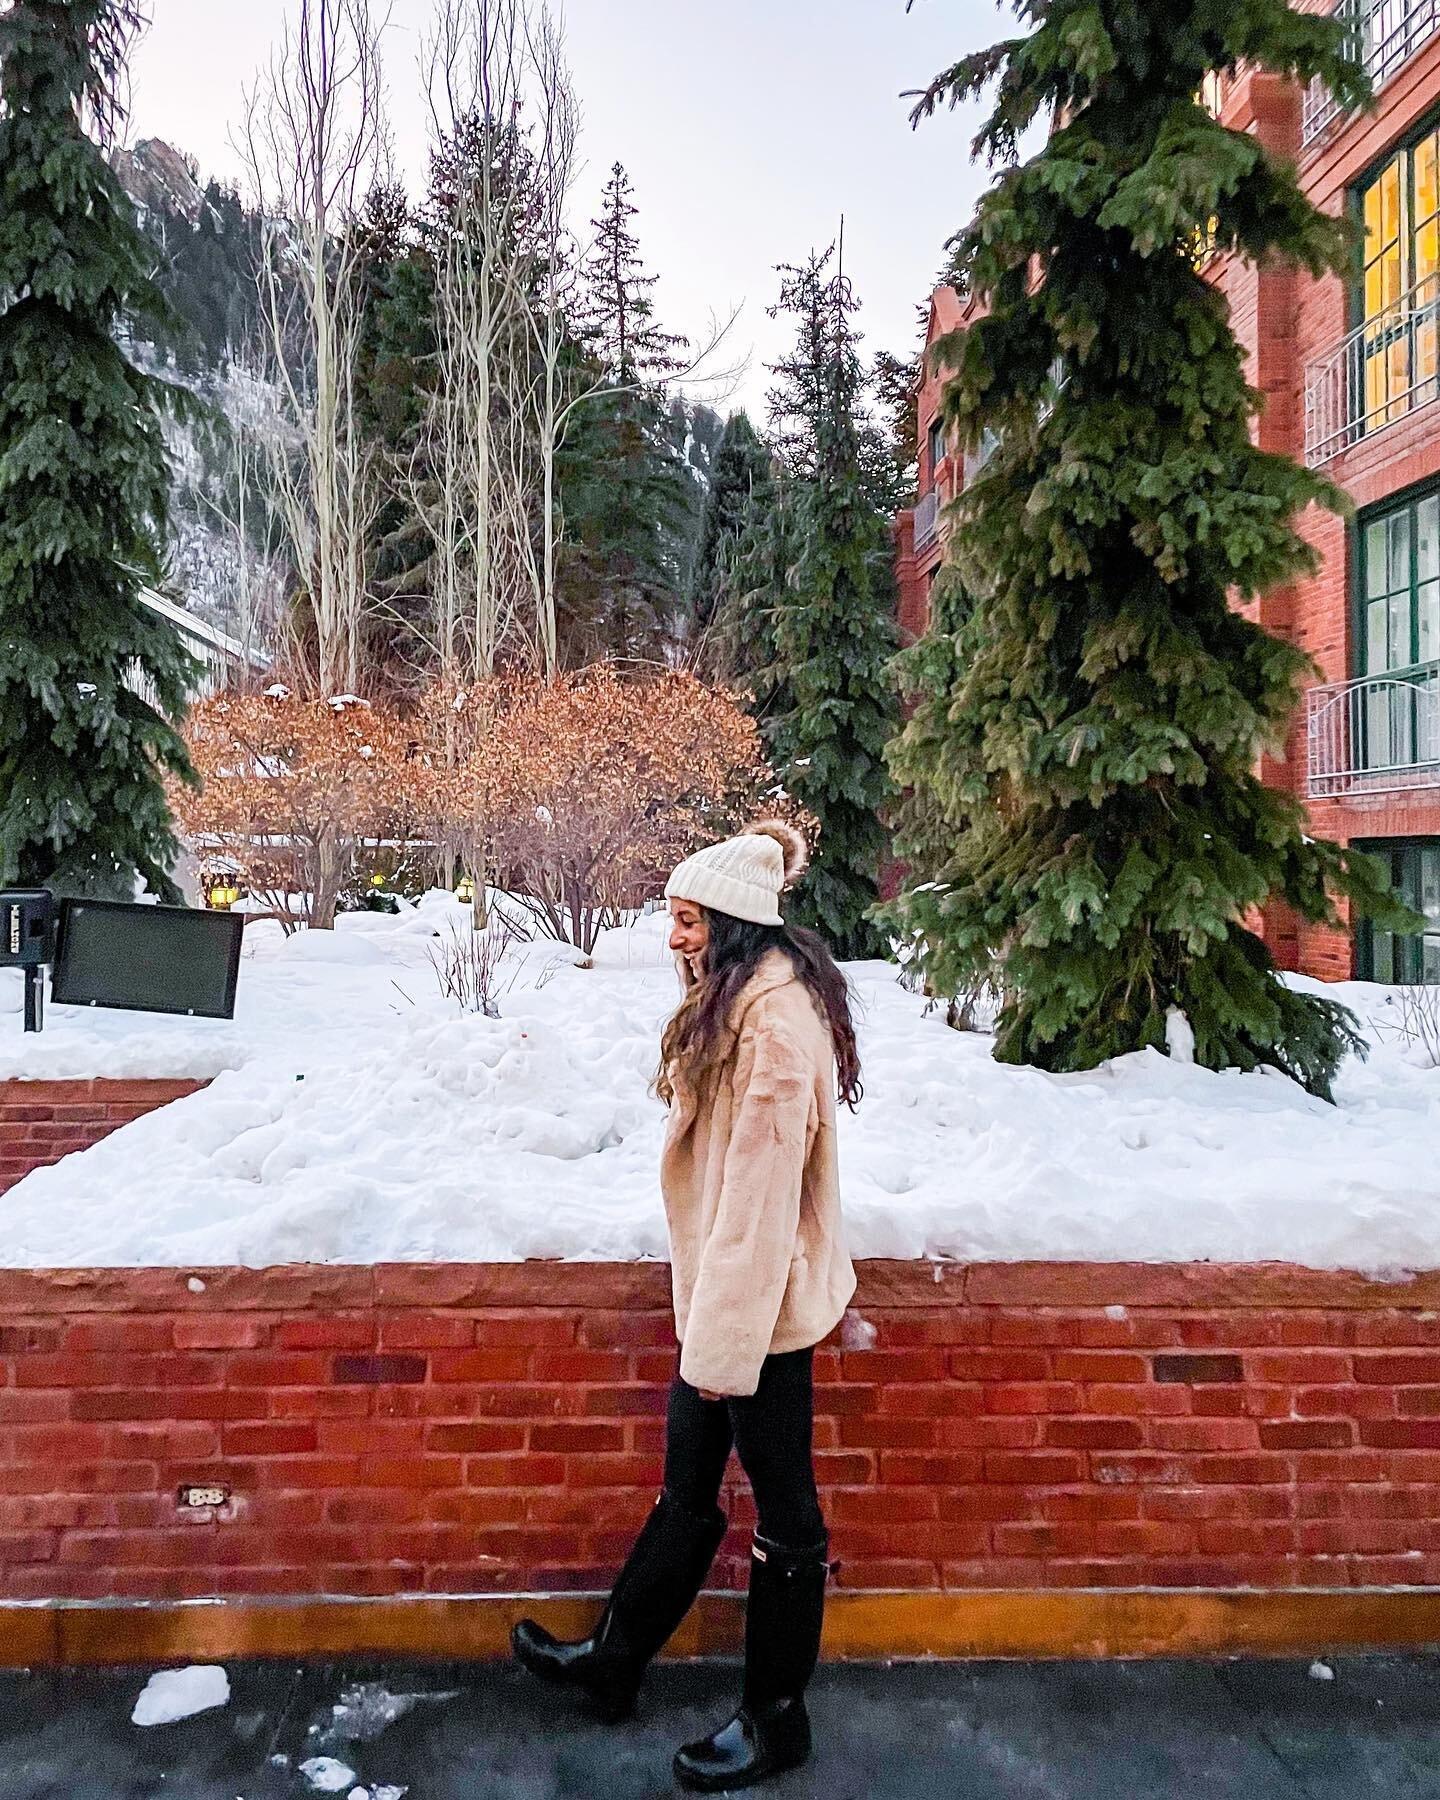 freeze the day !❄️

I just got back from aspen and it&rsquo;s the cutest little city! I loved skiing, walking around, going to hot yoga, and spending quality time with my parents. As much as I love OC&rsquo;s sunny weather, it&rsquo;s always so magic